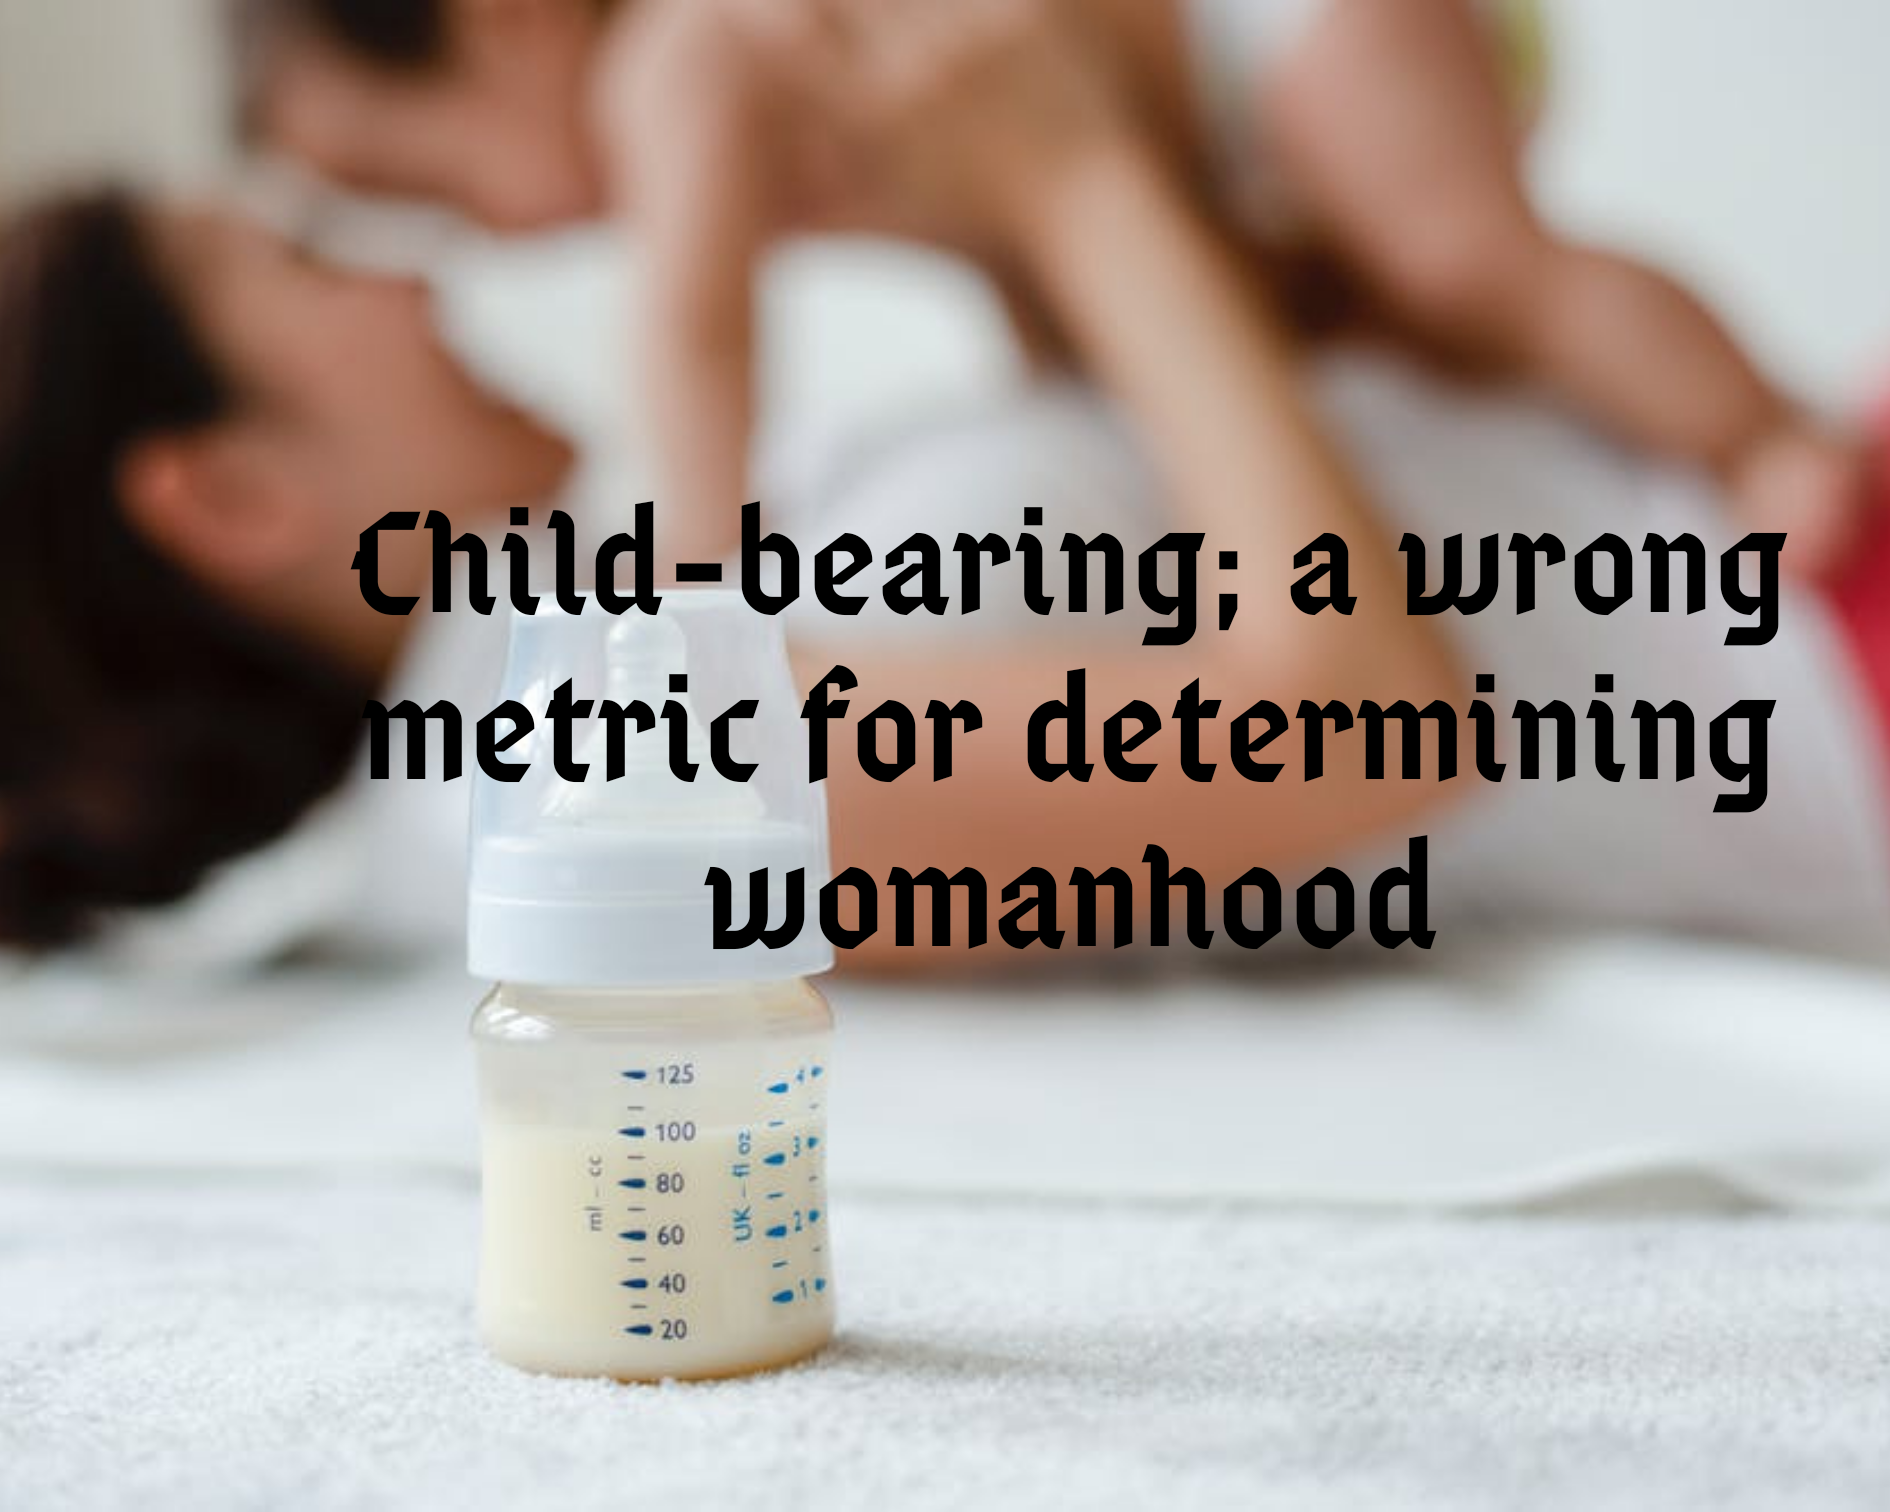 WOMEN WITH ONLY DAUGHTERS ARE NOT LESS; CHILD-BEARING NOT A METRIC FOR DETERMINING WOMANHOOD